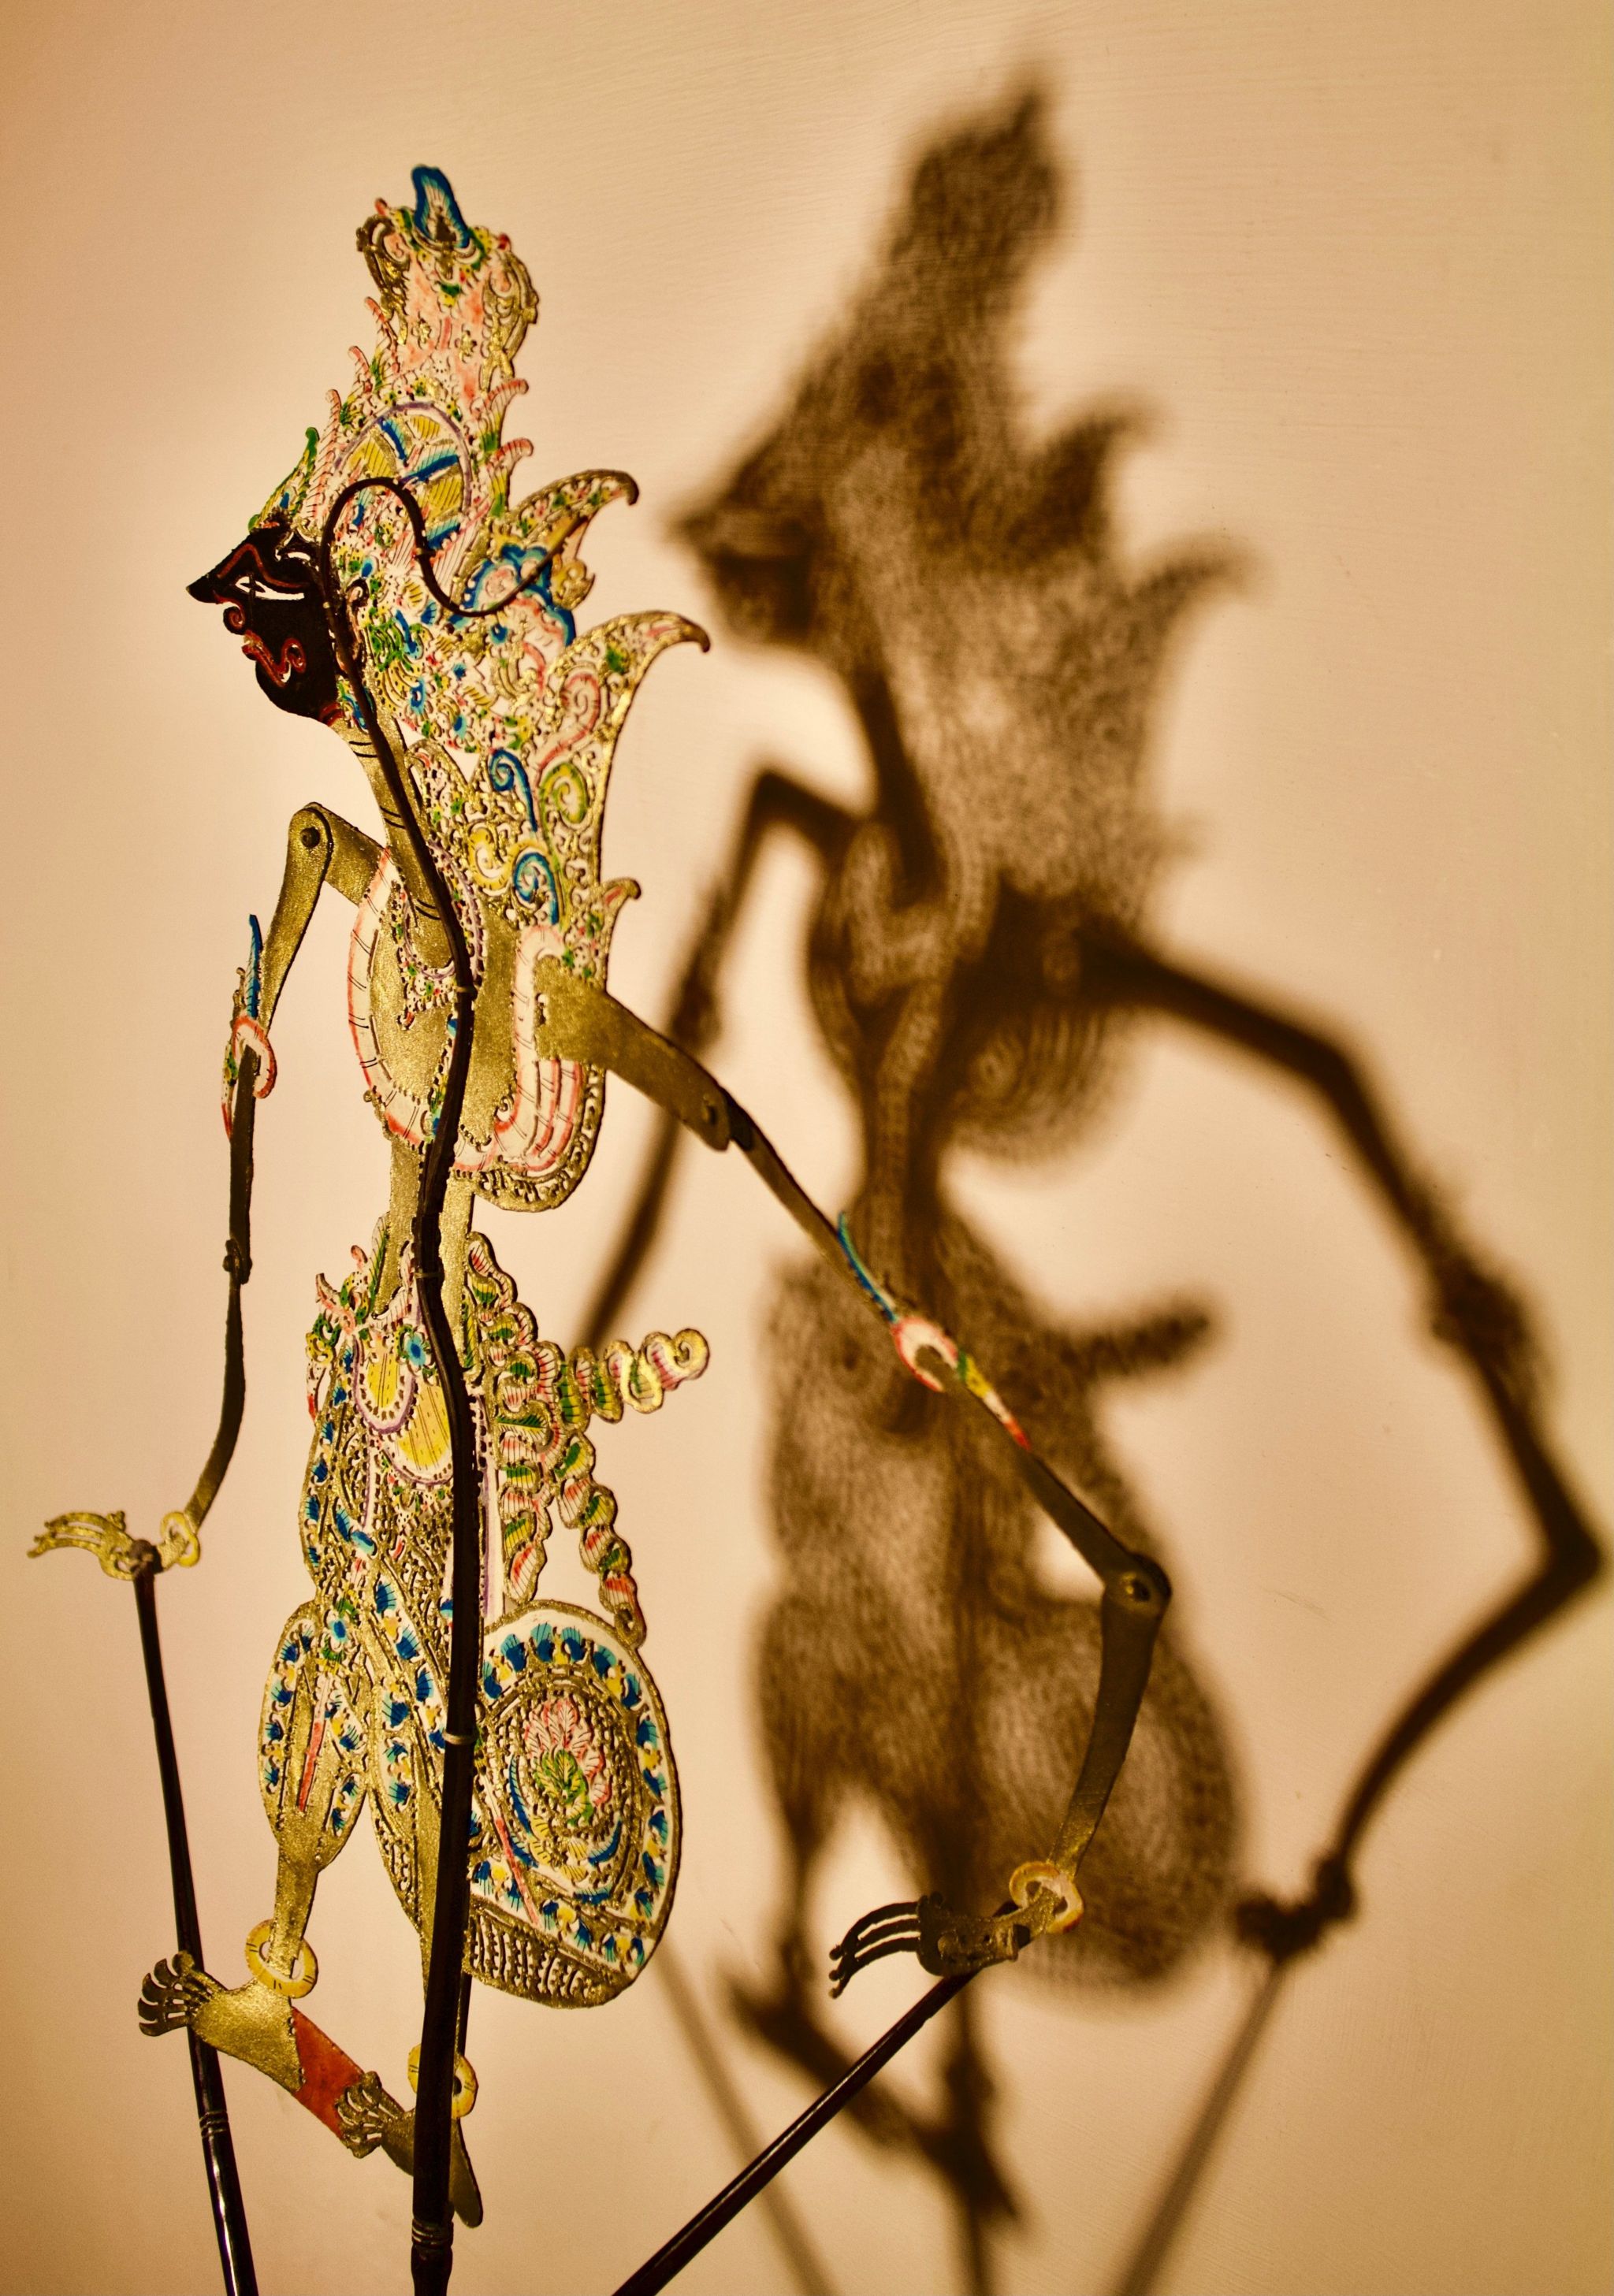 An Indonesian shadow puppet casting a shadow on the wall